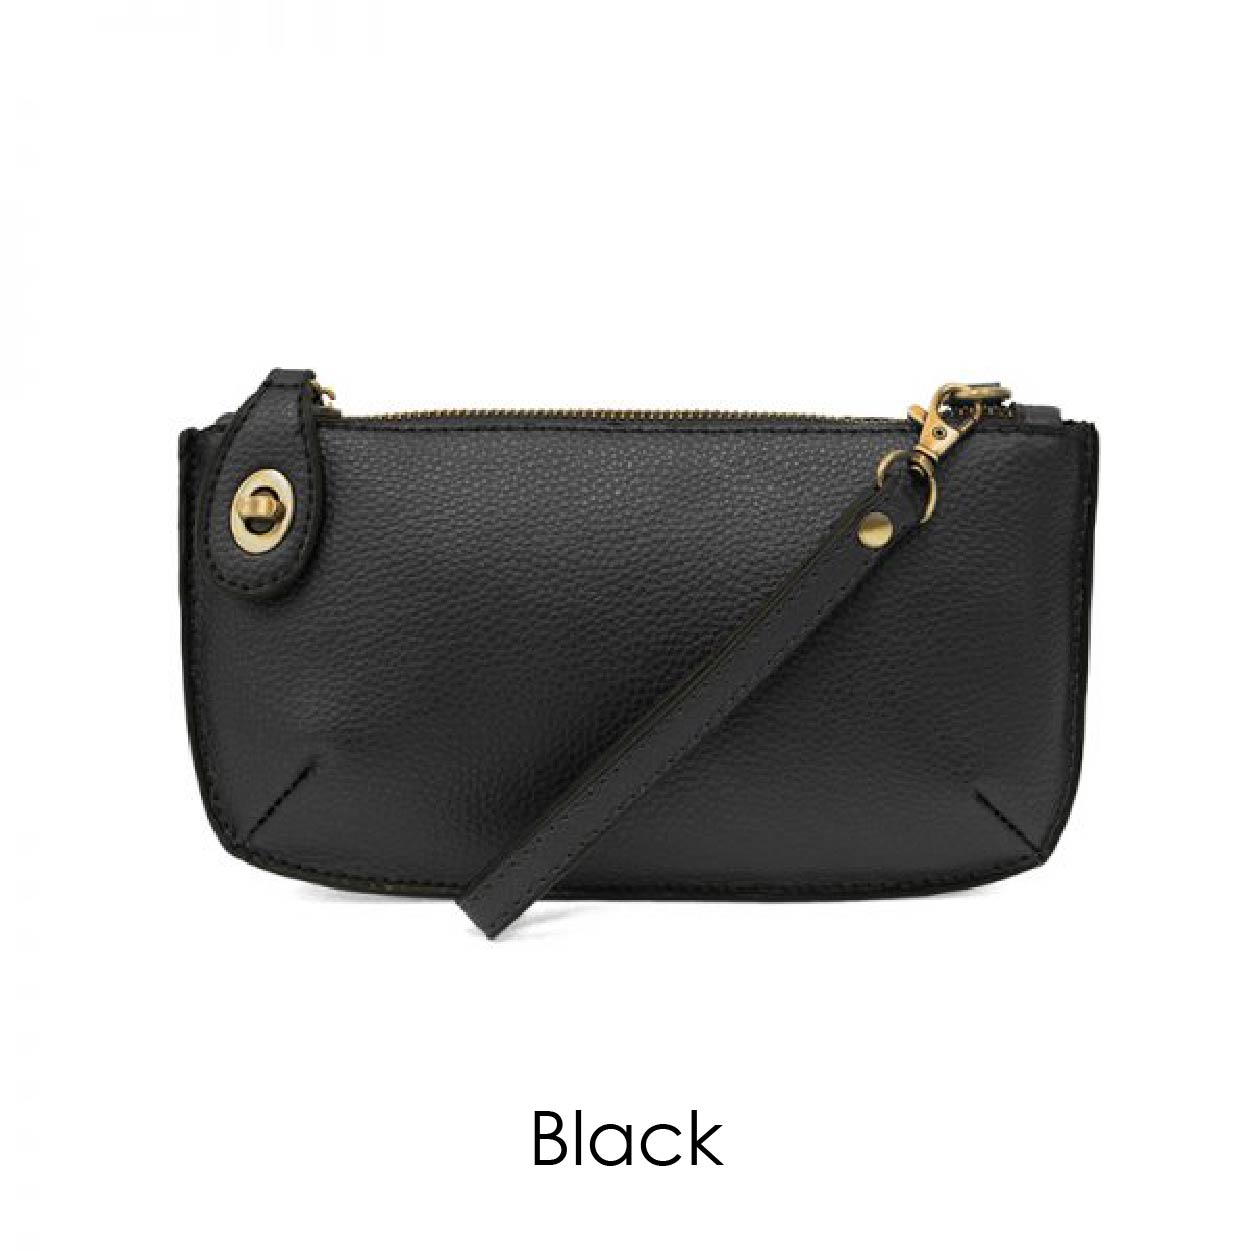 black leather clutch on a white background